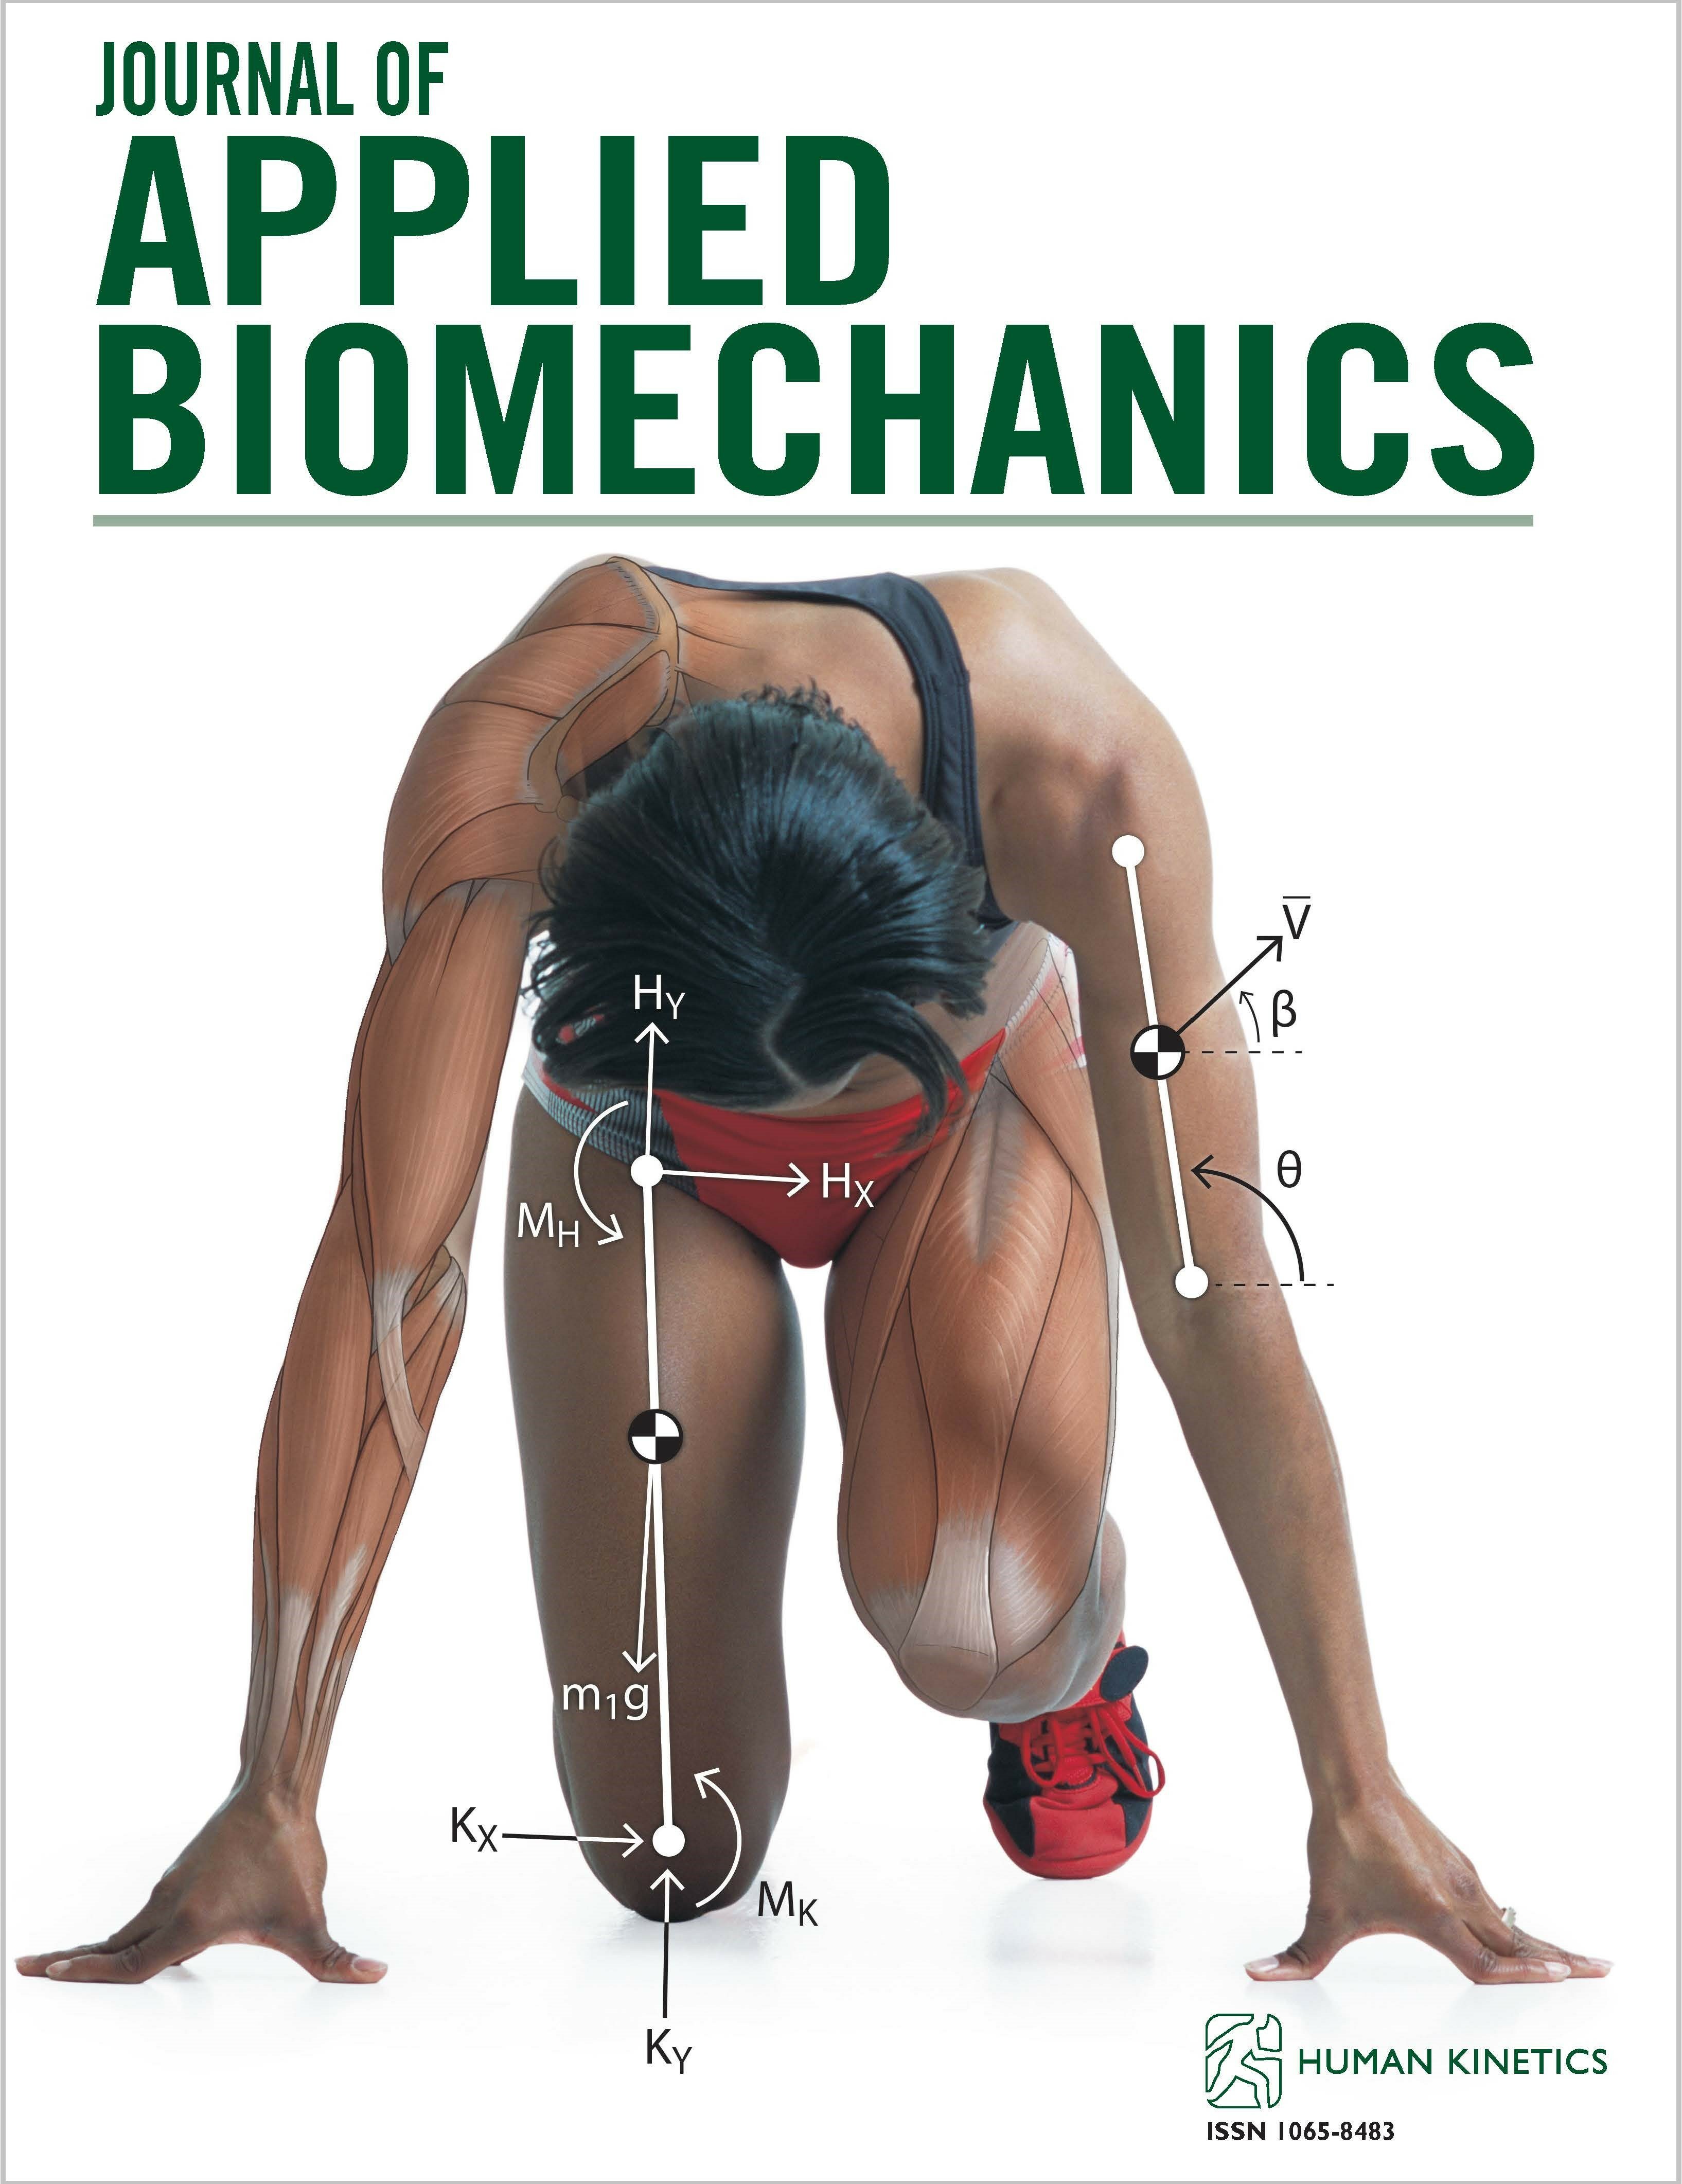 The History and Future of Neuromusculoskeletal Biomechanics